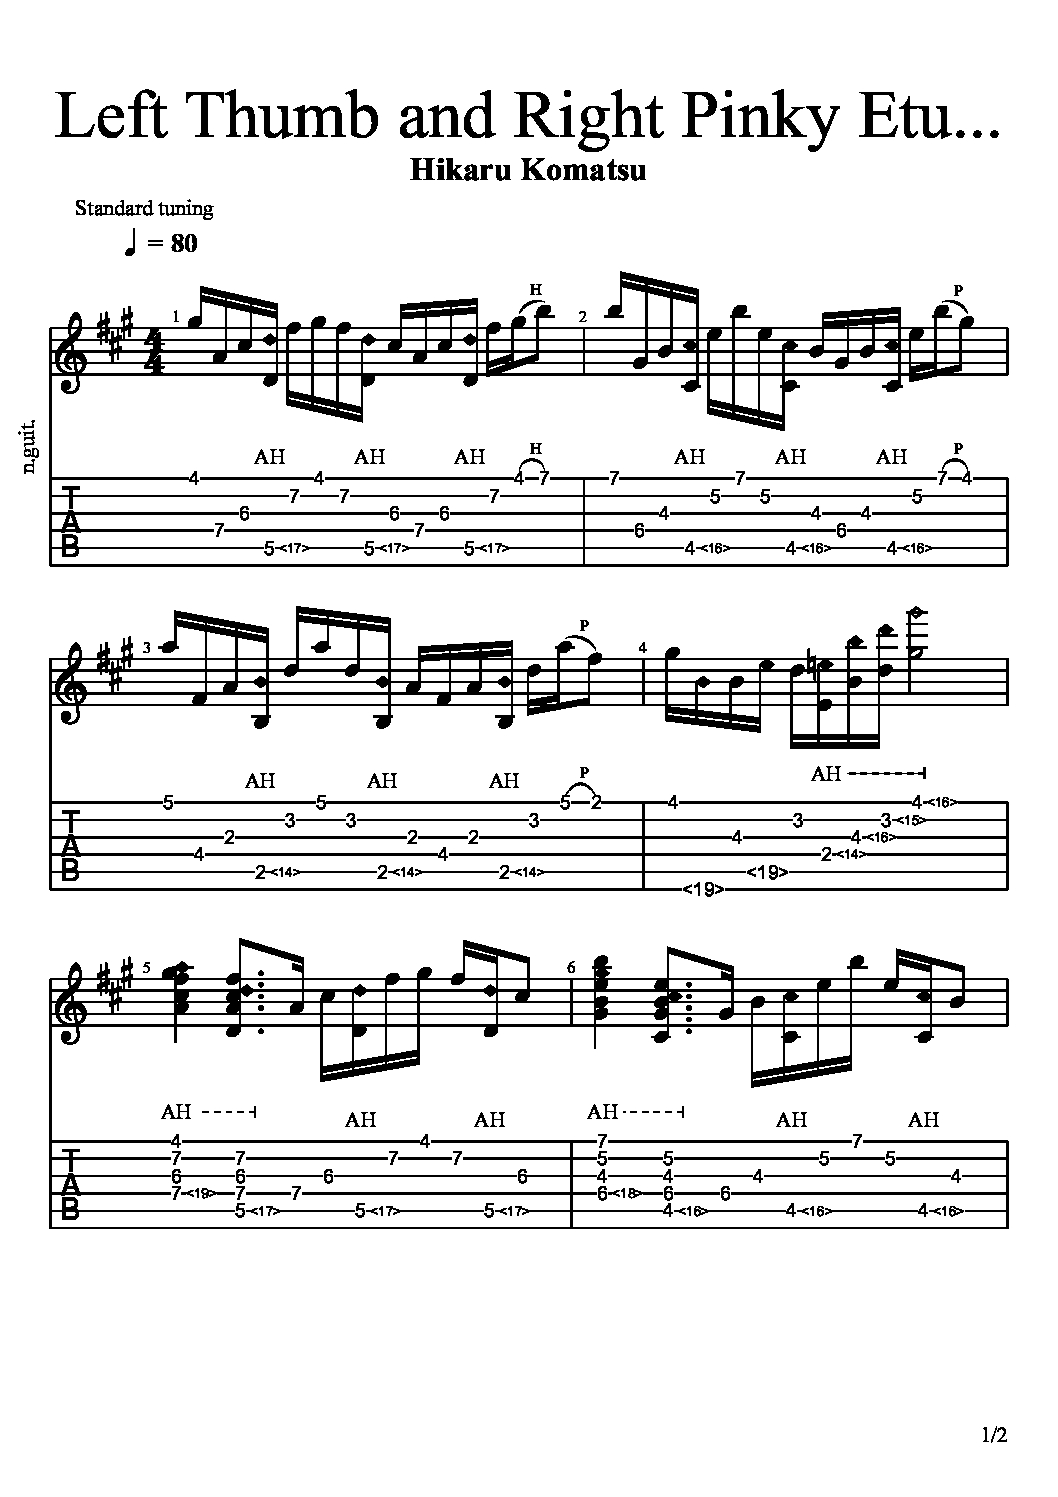 Left Thumb and Right Pinky Etude